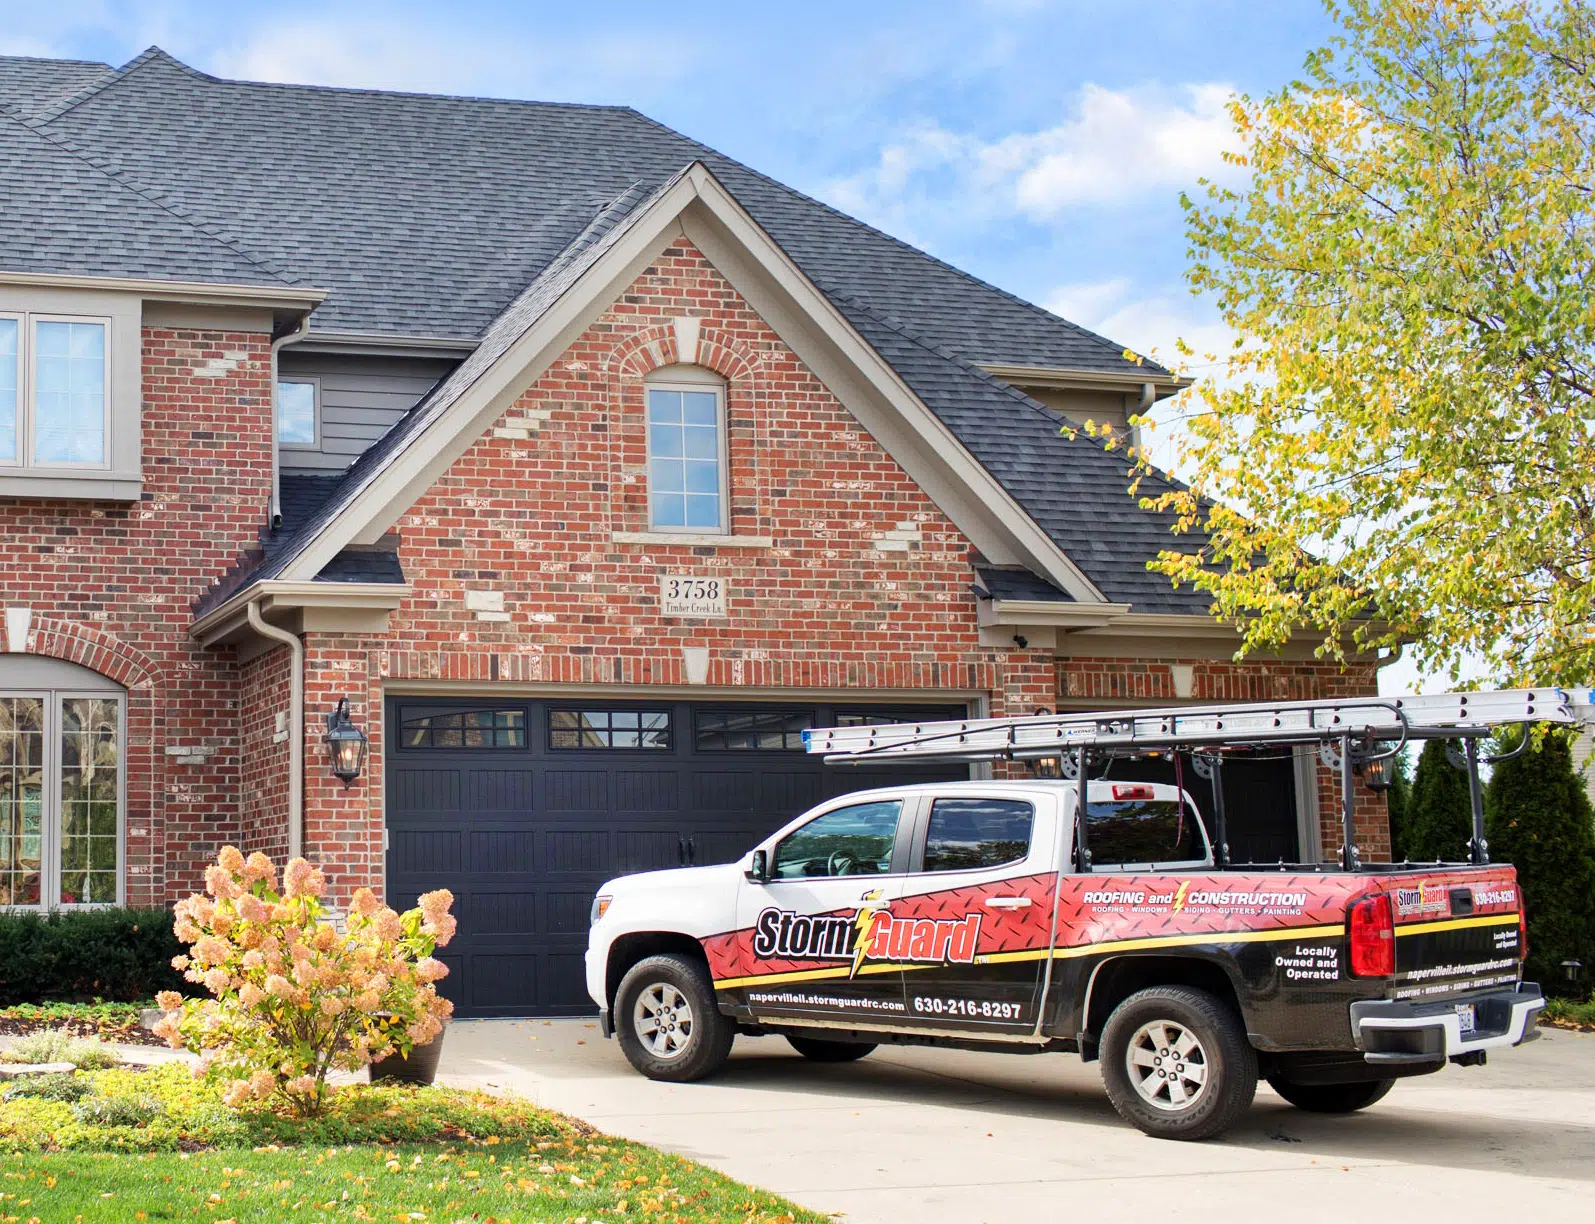 Brick House with Storm Guard Restoration Services Truck In Driveway -stormguard professional roofing service in south metro denver